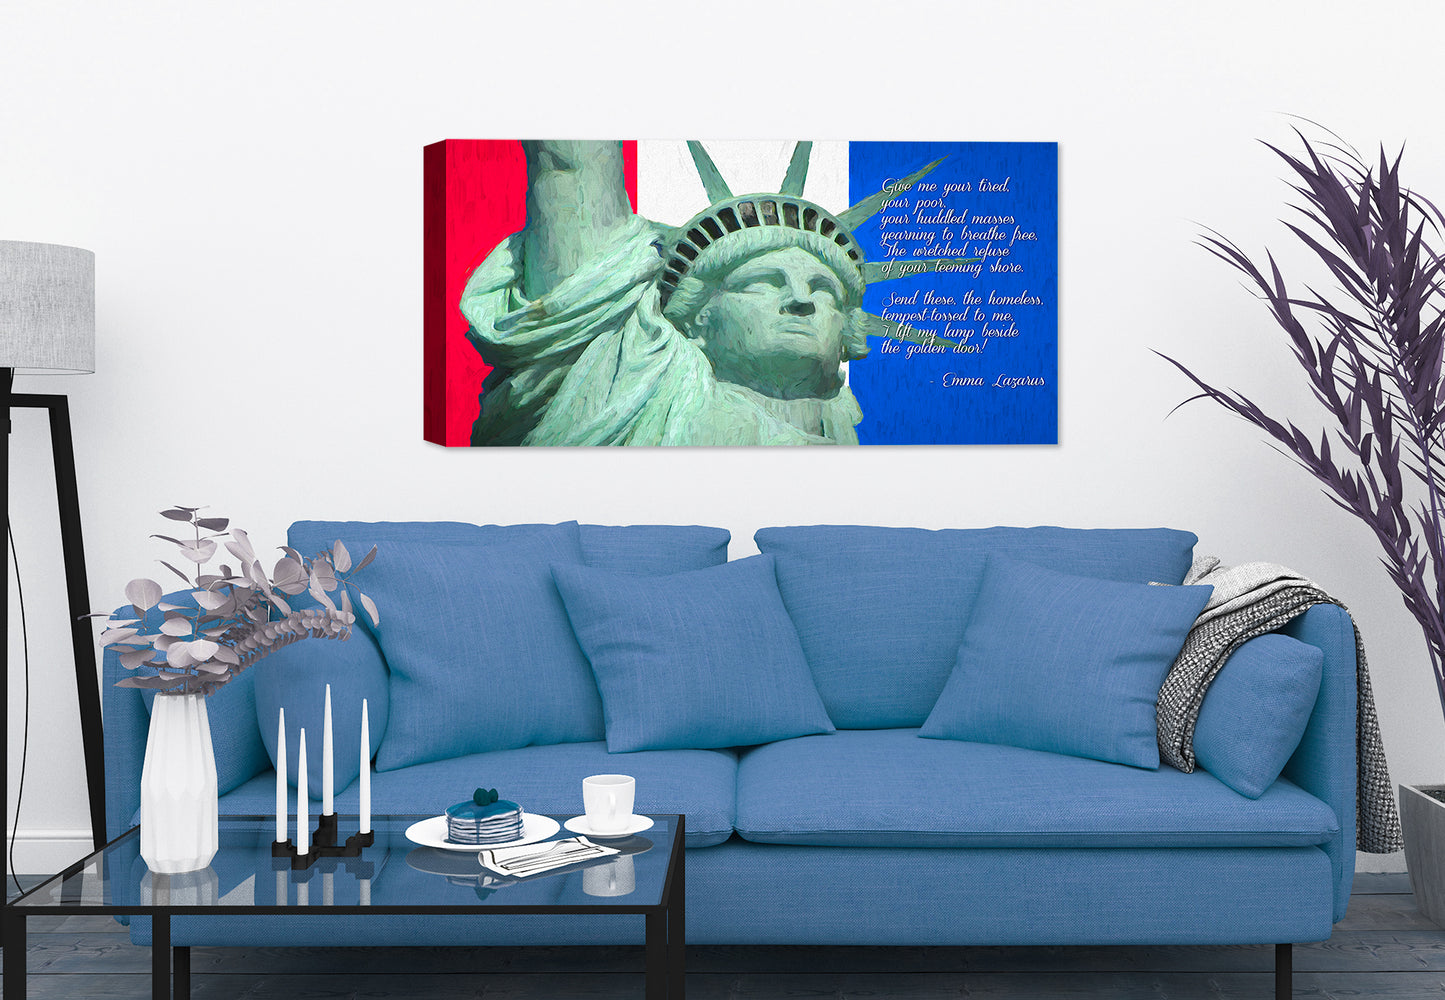 Statue of Liberty - Fine Art Painting - Special Limited Edition of 25 - Hand Signed